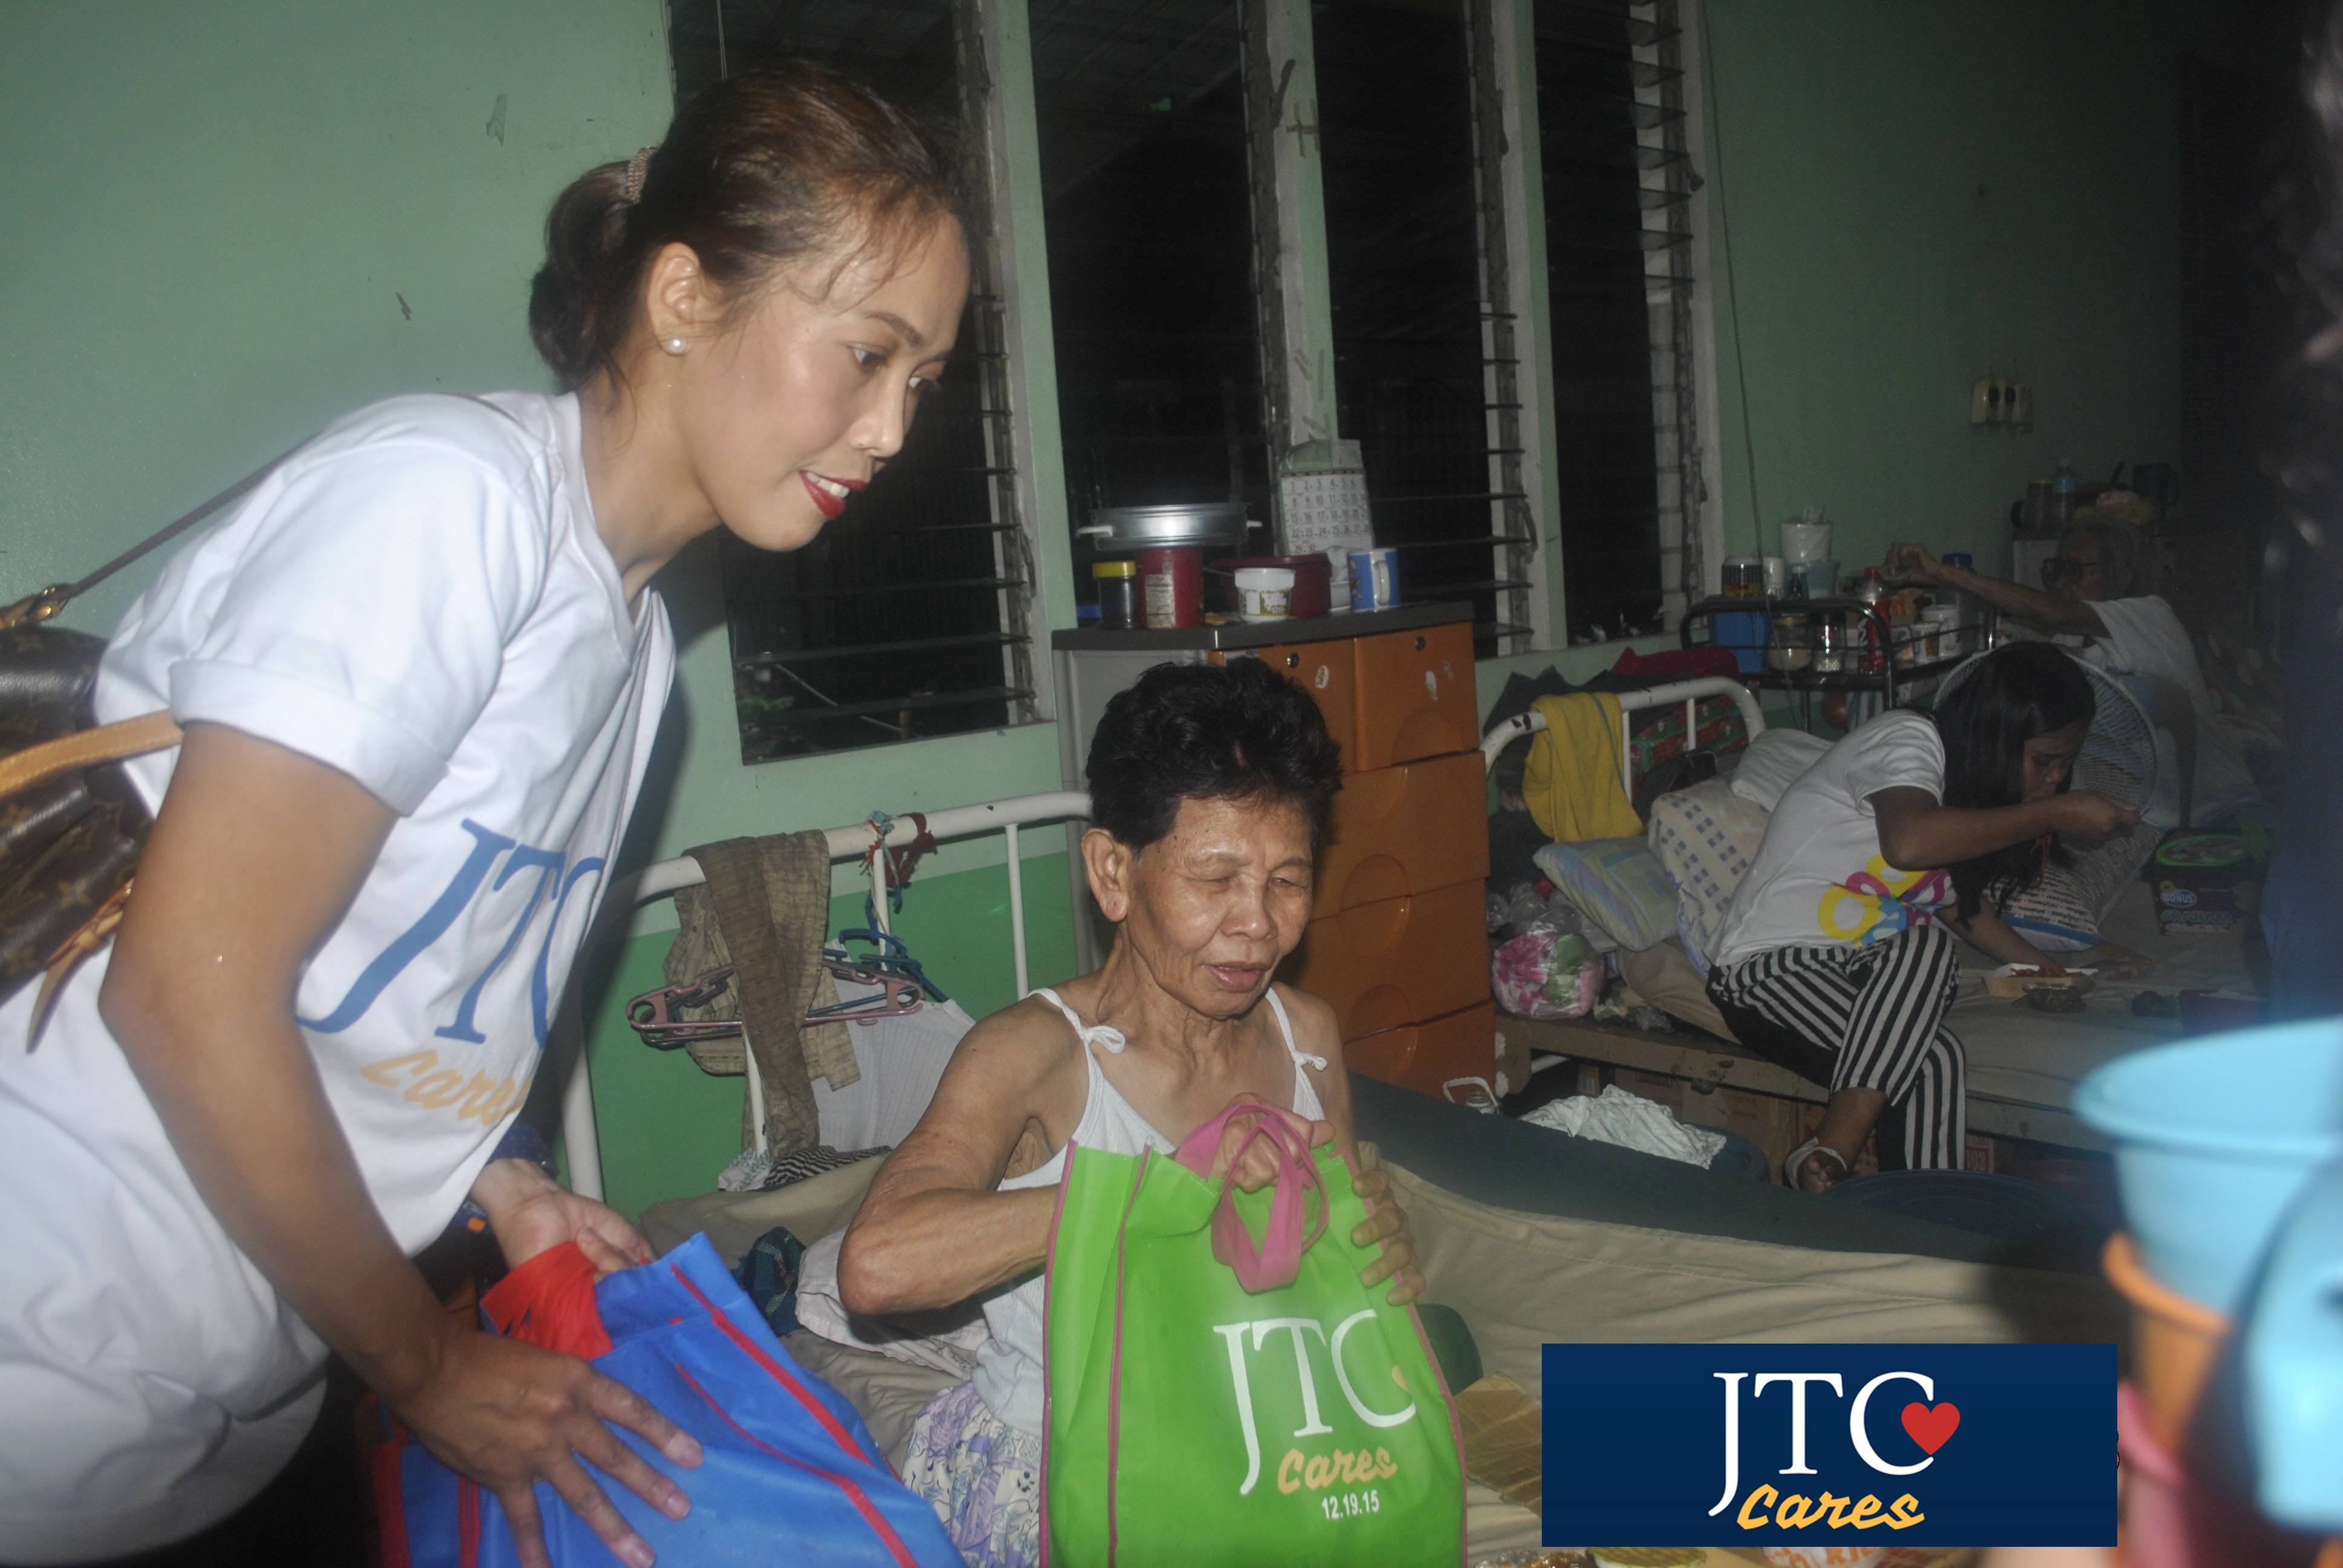 JTC are providing gifts.